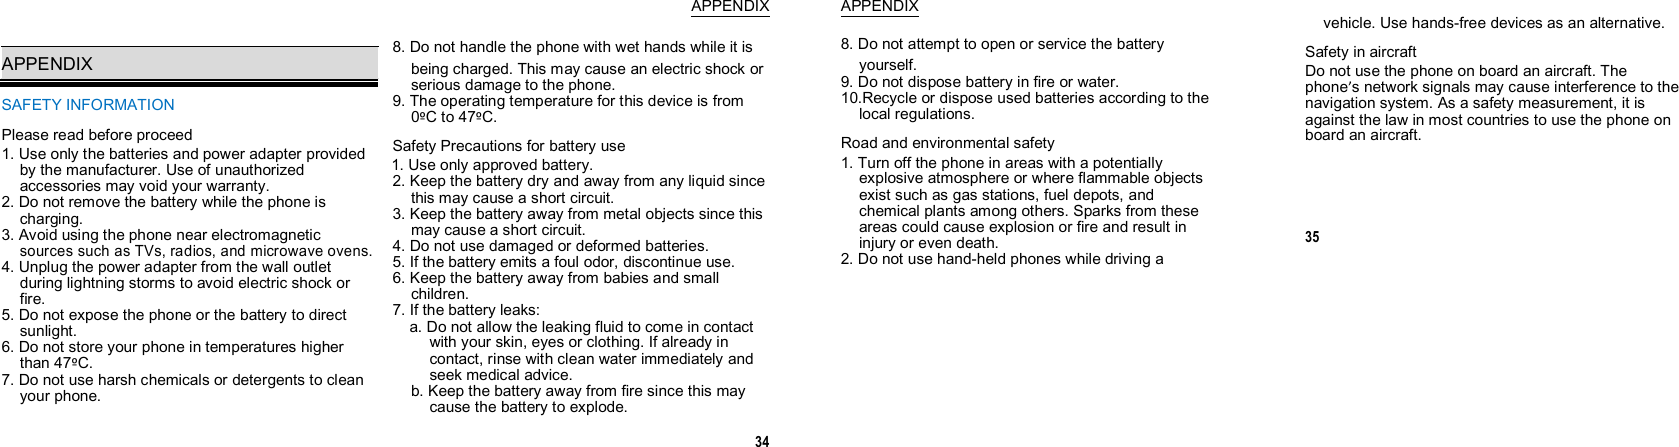  APPENDIX  APPENDIX SAFETY INFORMATION Please read before proceed 1. Use only the batteries and power adapter provided by the manufacturer. Use of unauthorized accessories may void your warranty. 2. Do not remove the battery while the phone is charging. 3. Avoid using the phone near electromagnetic sources such as TVs, radios, and microwave ovens. 4. Unplug the power adapter from the wall outlet during lightning storms to avoid electric shock or fire. 5. Do not expose the phone or the battery to direct sunlight. 6. Do not store your phone in temperatures higher than 47ºC. 7. Do not use harsh chemicals or detergents to clean your phone. 8. Do not handle the phone with wet hands while it is being charged. This may cause an electric shock or serious damage to the phone. 9. The operating temperature for this device is from 0ºC to 47ºC. Safety Precautions for battery use 1. Use only approved battery. 2. Keep the battery dry and away from any liquid since this may cause a short circuit. 3. Keep the battery away from metal objects since this may cause a short circuit. 4. Do not use damaged or deformed batteries. 5. If the battery emits a foul odor, discontinue use. 6. Keep the battery away from babies and small children. 7. If the battery leaks: a. Do not allow the leaking fluid to come in contact with your skin, eyes or clothing. If already in contact, rinse with clean water immediately and seek medical advice. b. Keep the battery away from fire since this may cause the battery to explode. 34 APPENDIX 8. Do not attempt to open or service the battery yourself. 9. Do not dispose battery in fire or water. 10.Recycle or dispose used batteries according to the local regulations. Road and environmental safety 1. Turn off the phone in areas with a potentially explosive atmosphere or where flammable objects exist such as gas stations, fuel depots, and chemical plants among others. Sparks from these areas could cause explosion or fire and result in injury or even death. 2. Do not use hand-held phones while driving a vehicle. Use hands-free devices as an alternative. Safety in aircraft Do not use the phone on board an aircraft. The phone’s network signals may cause interference to the navigation system. As a safety measurement, it is against the law in most countries to use the phone on board an aircraft.   35                 